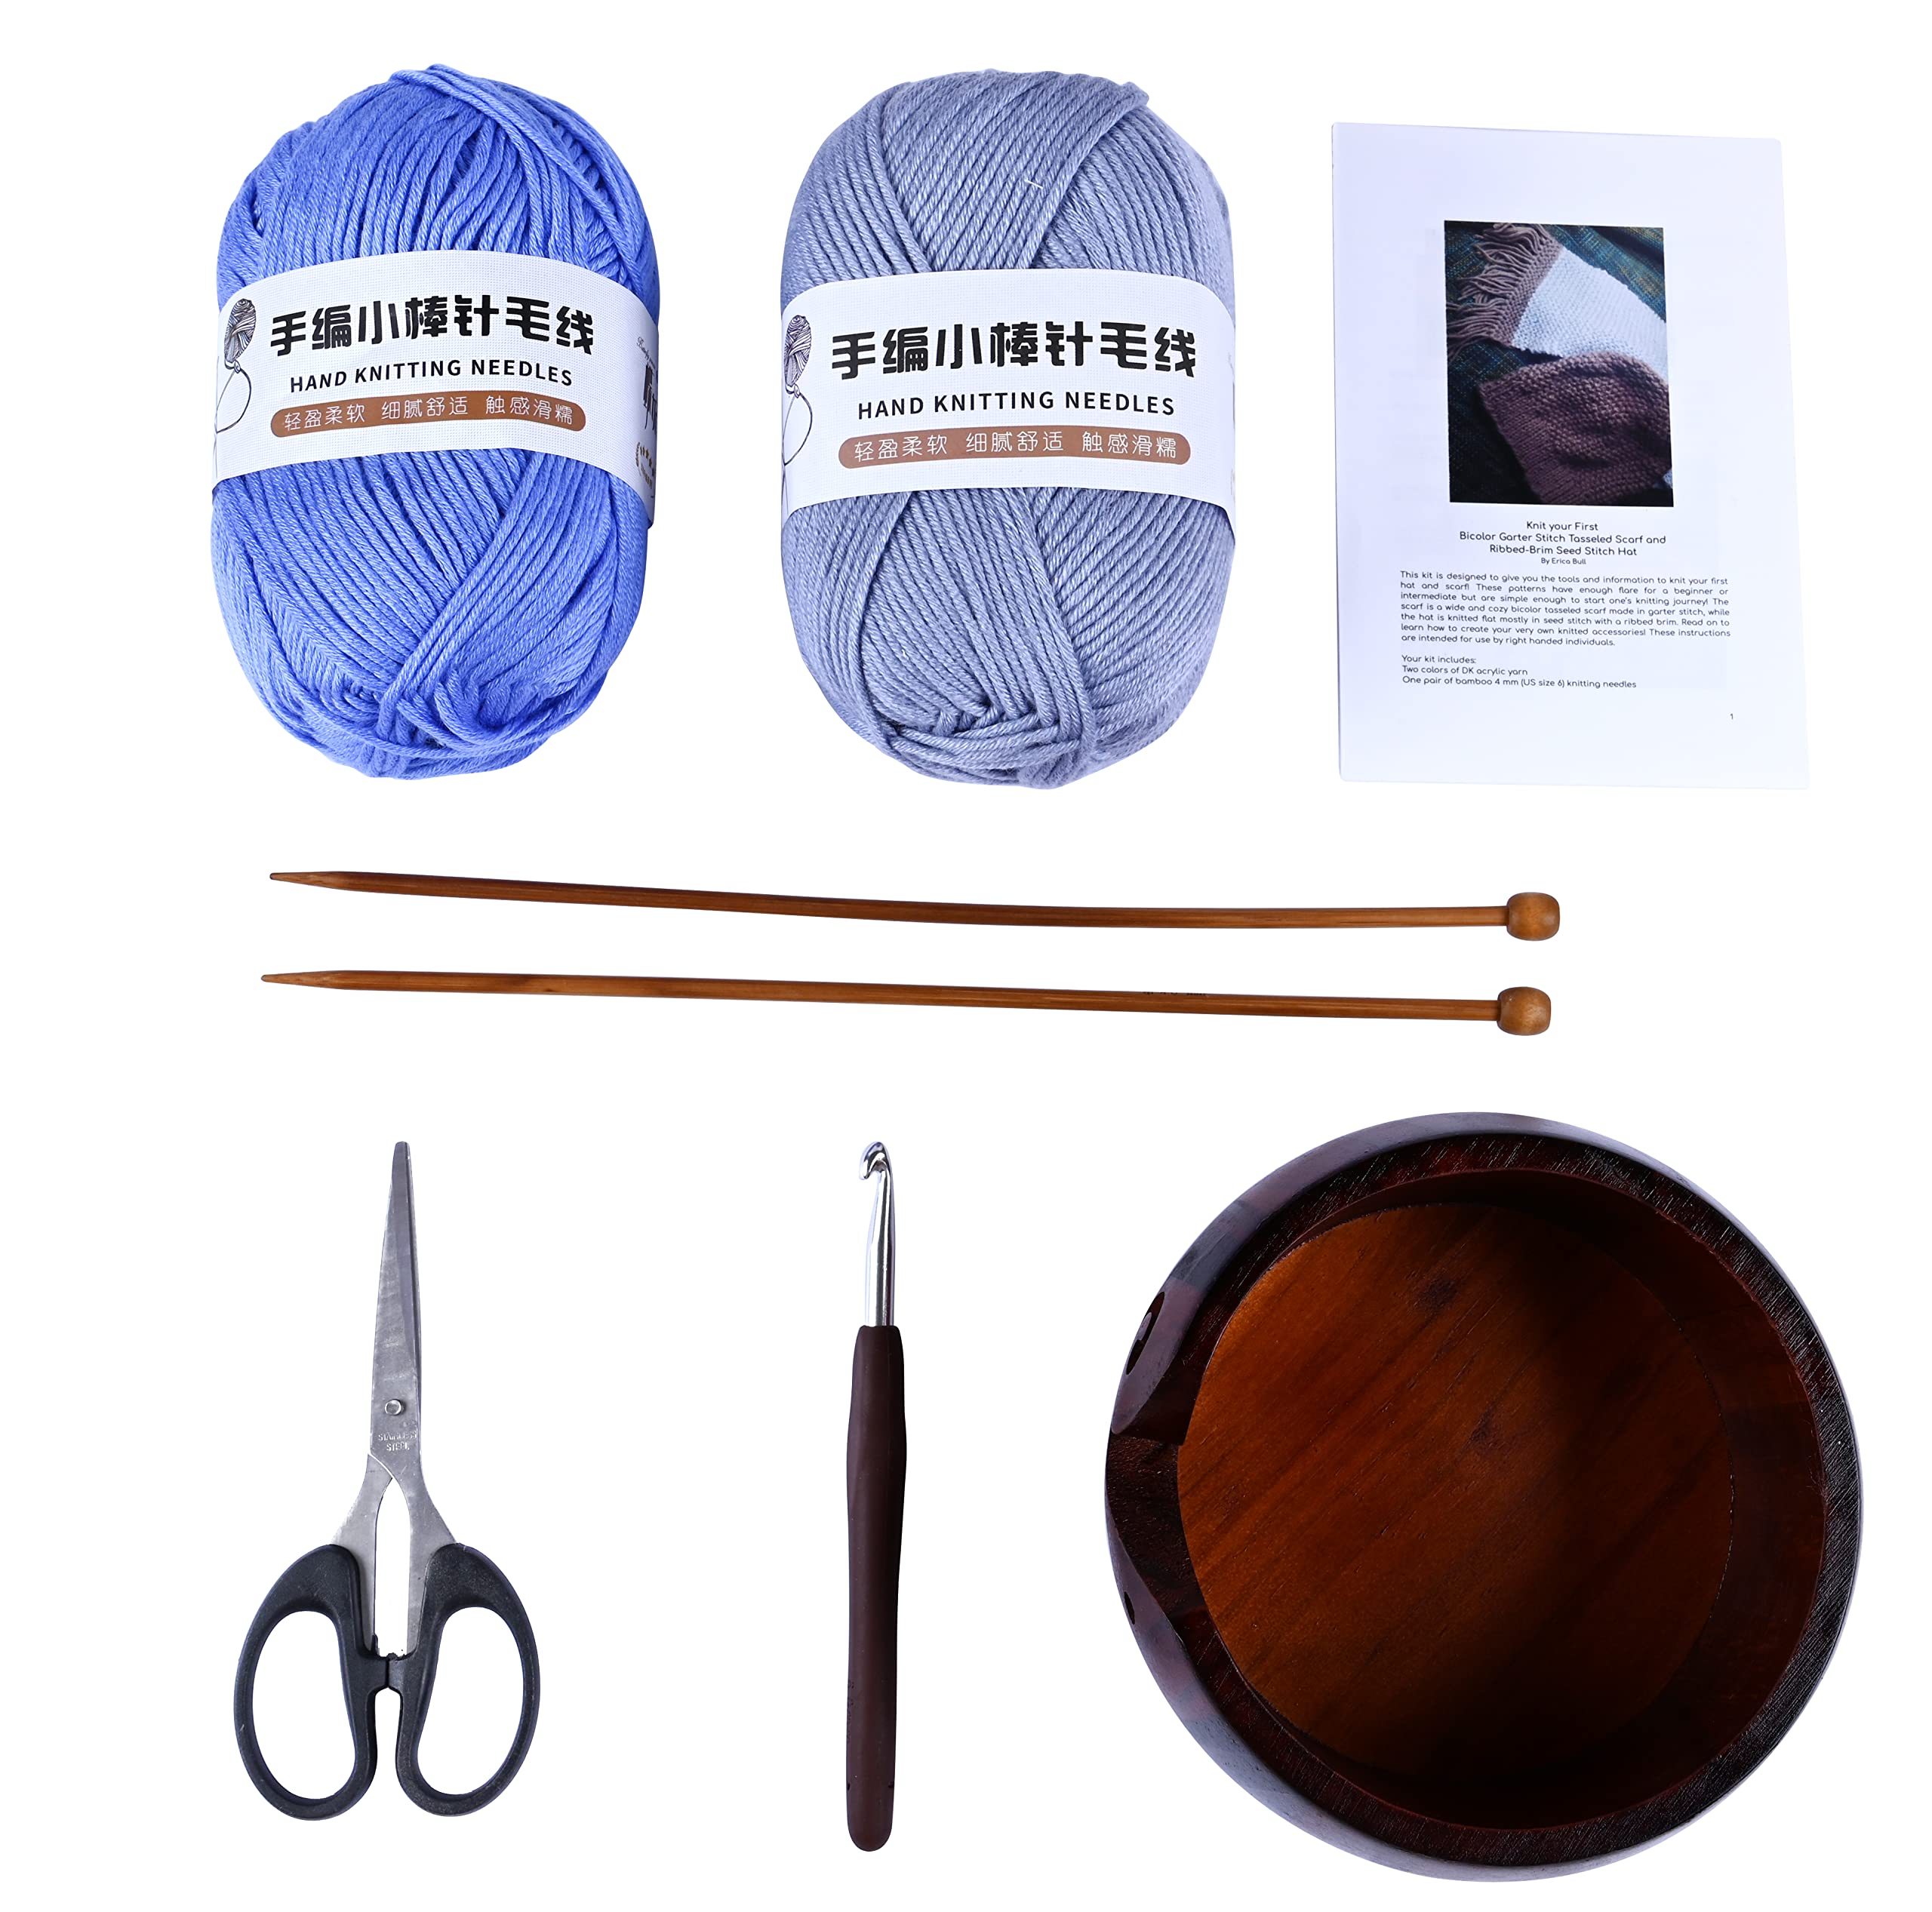 How to use different Knitting Accessories